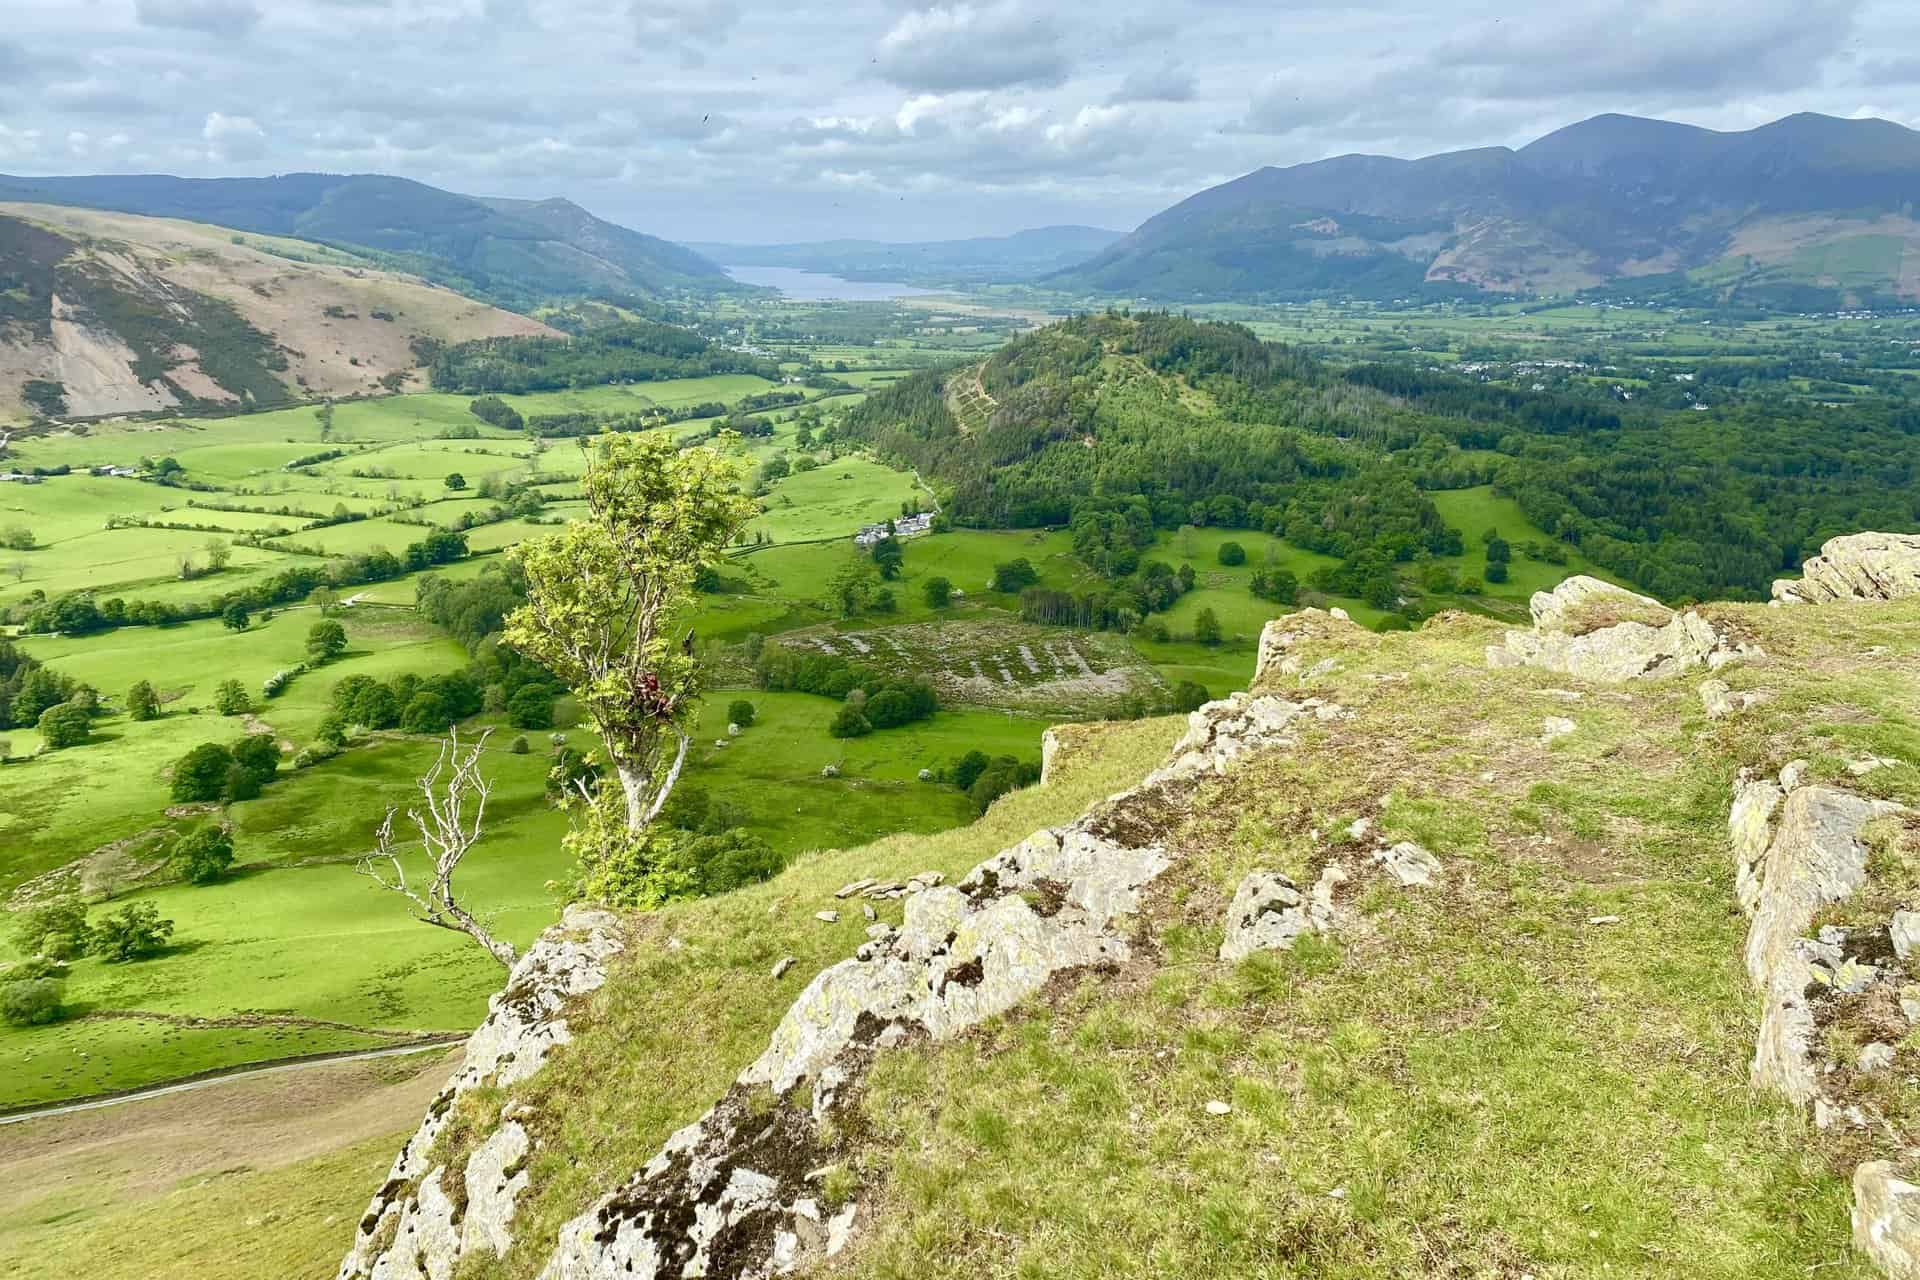 Looking north from Skelgill Bank towards Swinside (the tree-covered hill) and Bassenthwaite Lake.